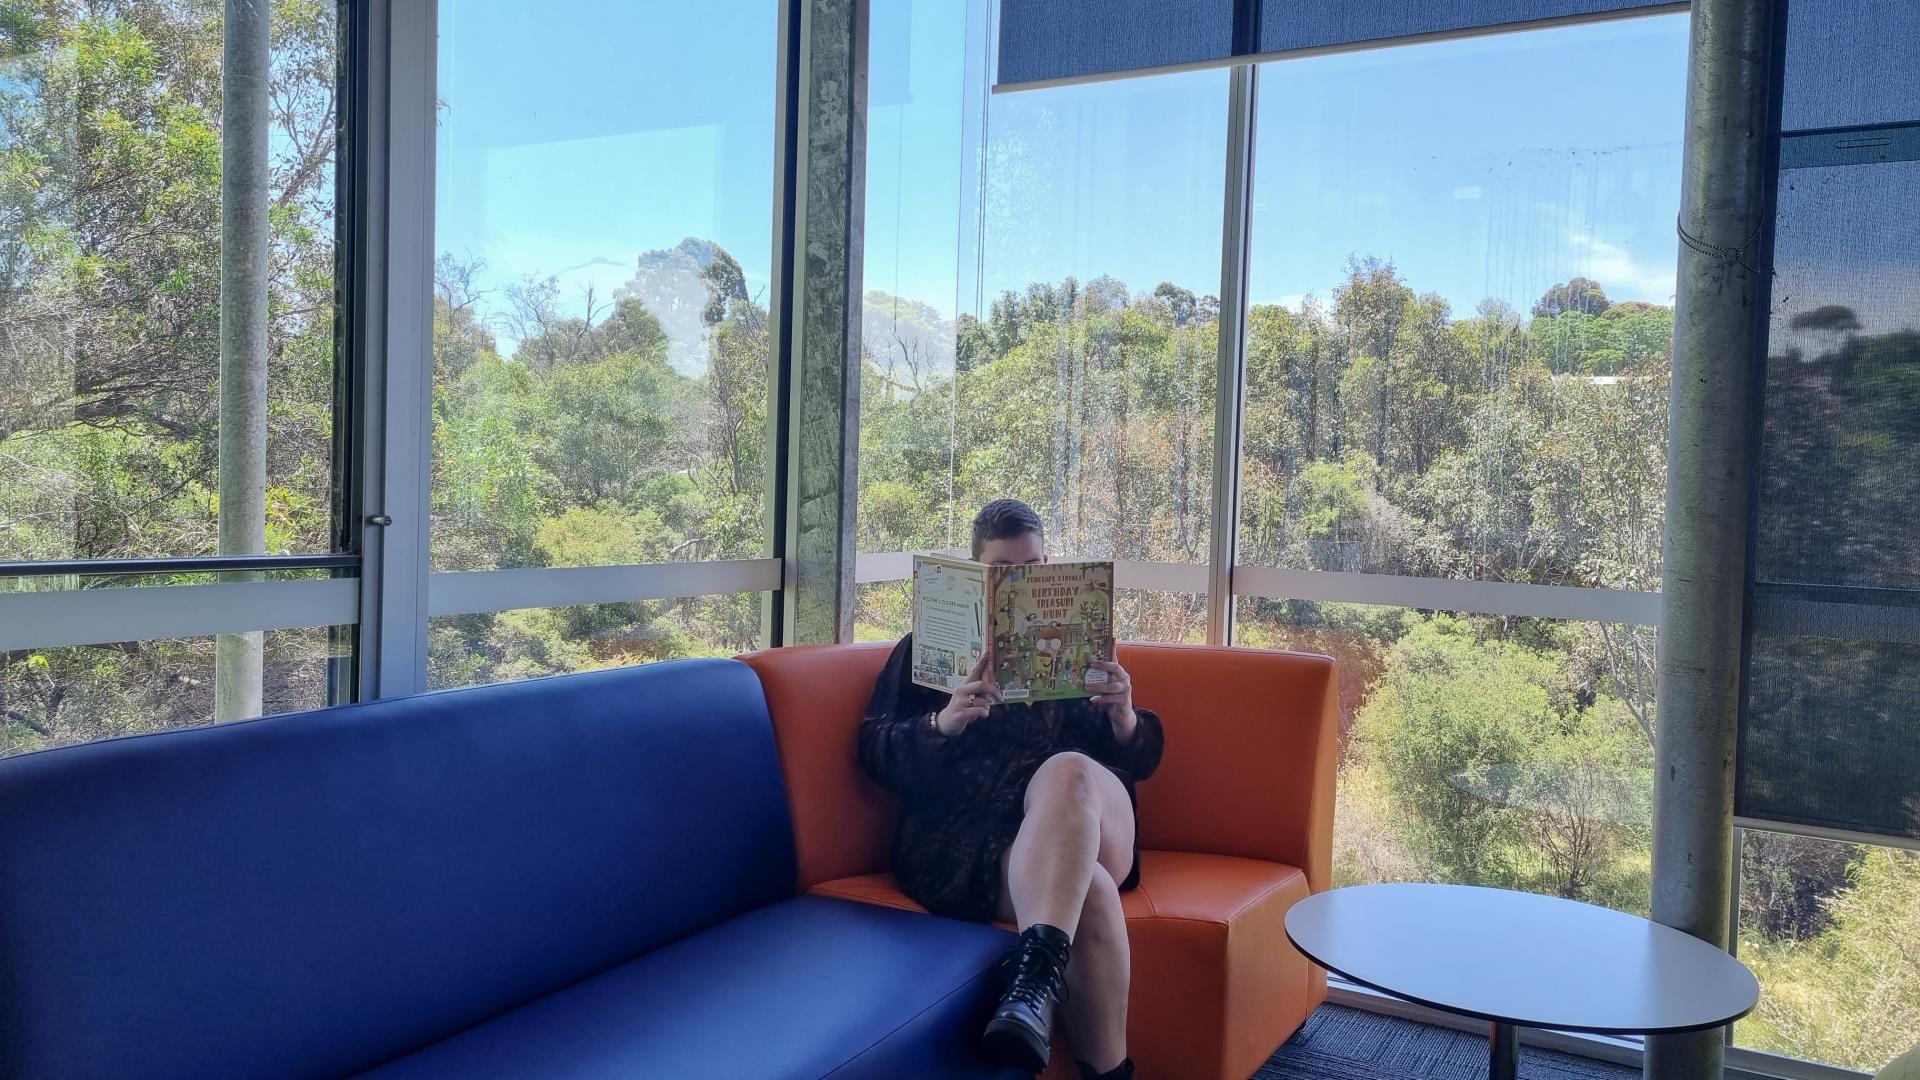 Reading a book on the new library furniture